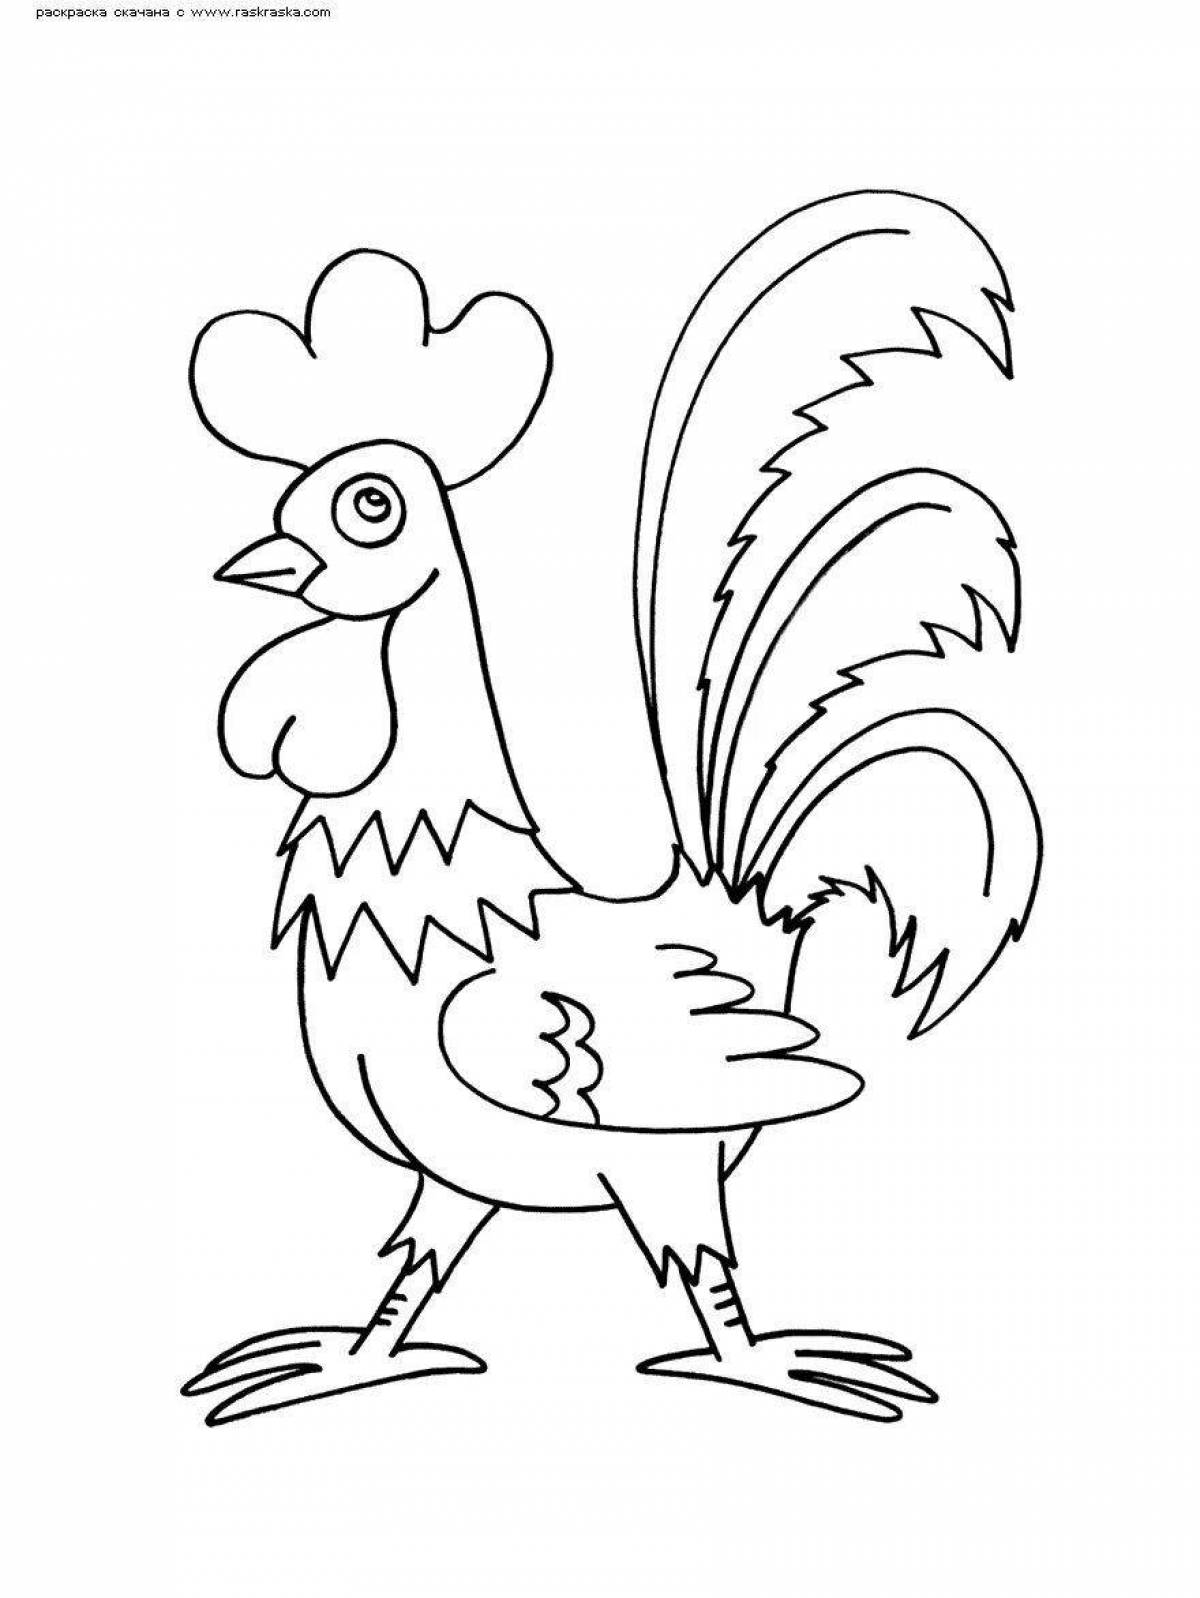 Coloring page festive rooster